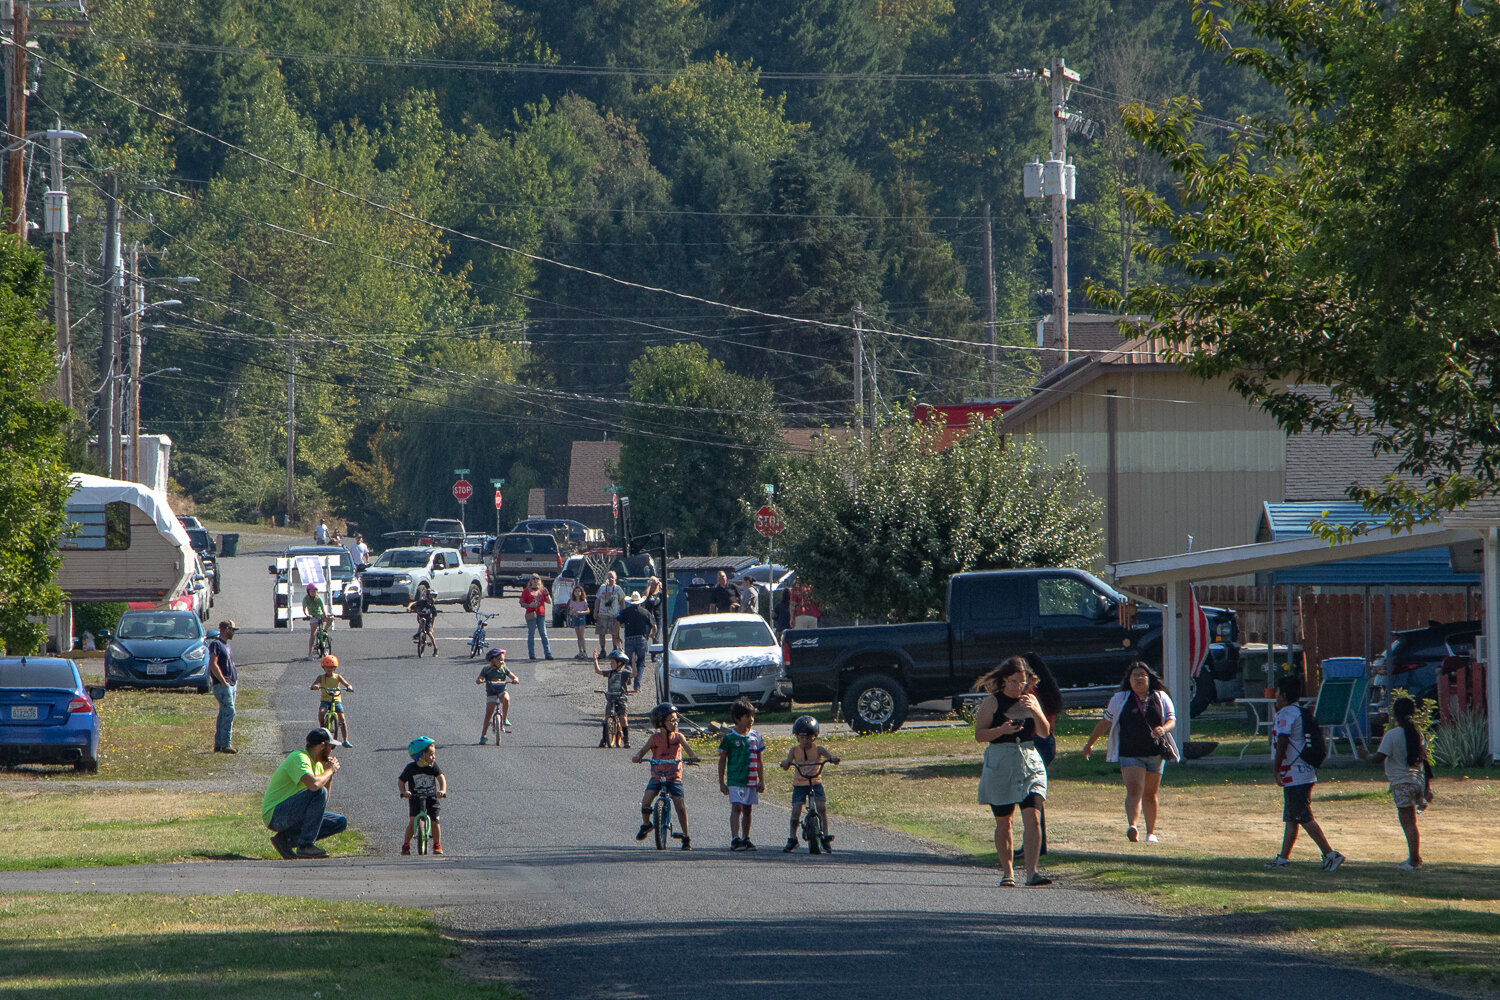 Parents prepare their children to participate in the bike races down West Main Street in Mossyrock kicking off the city's Mexican Independence Day celebration on Saturday, Sept. 16.